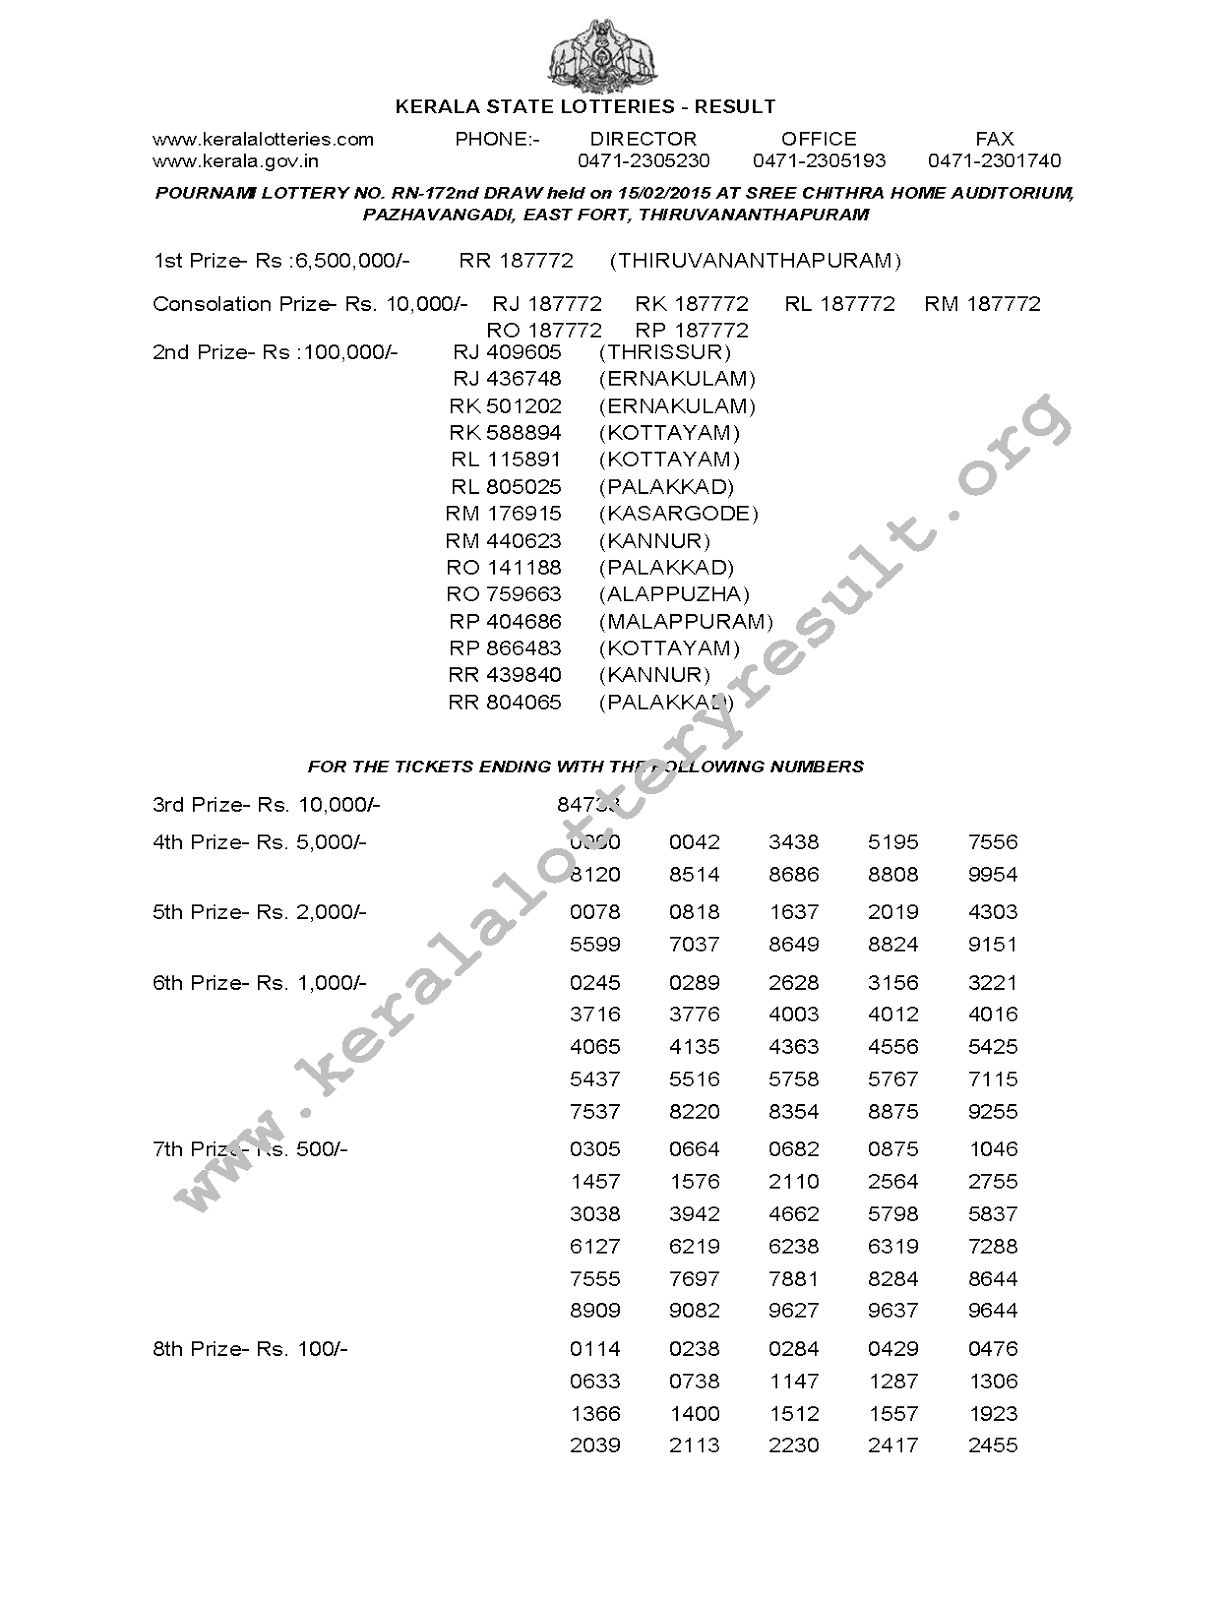 POURNAMI RN 172 Lottery Result 15-02-2015